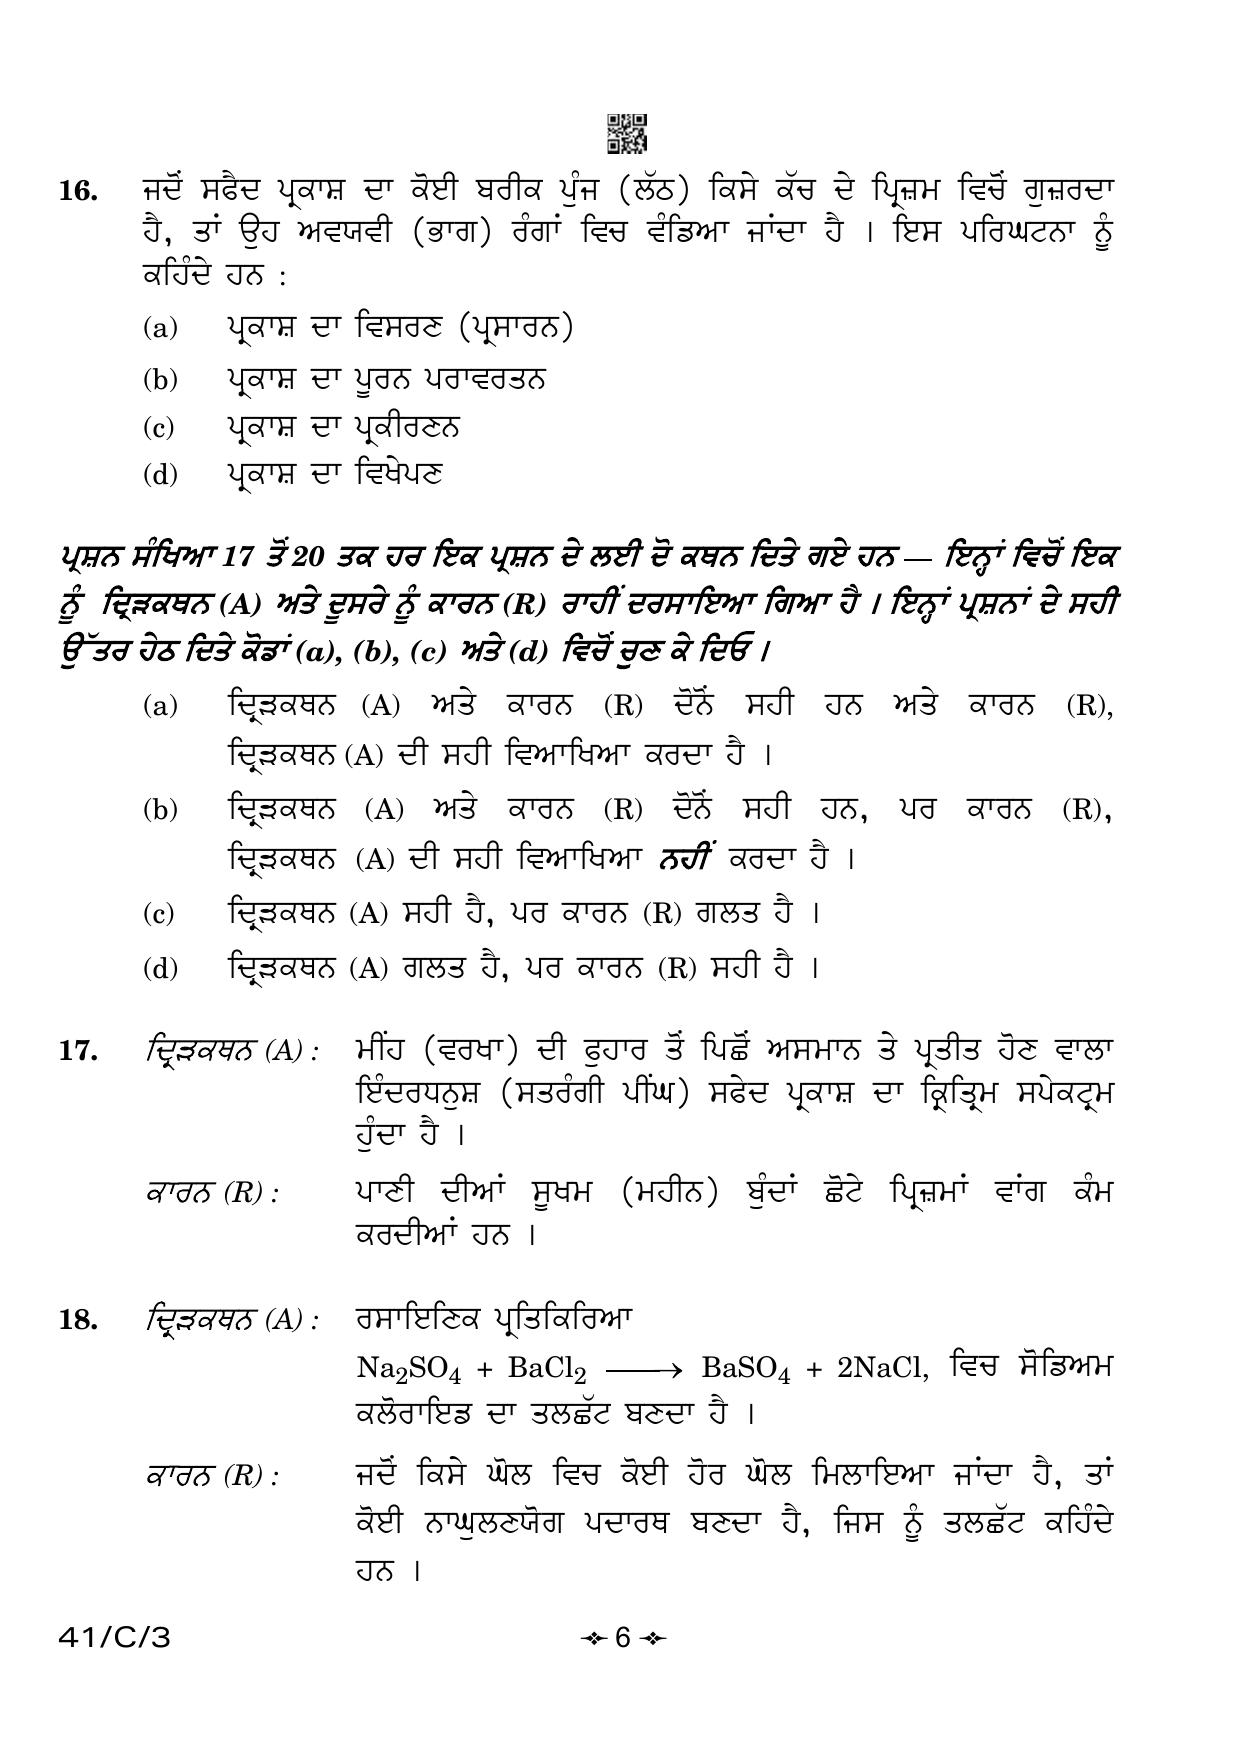 CBSE Class 10 41-3 Science Punjabi 2023 (Compartment) Question Paper - Page 6